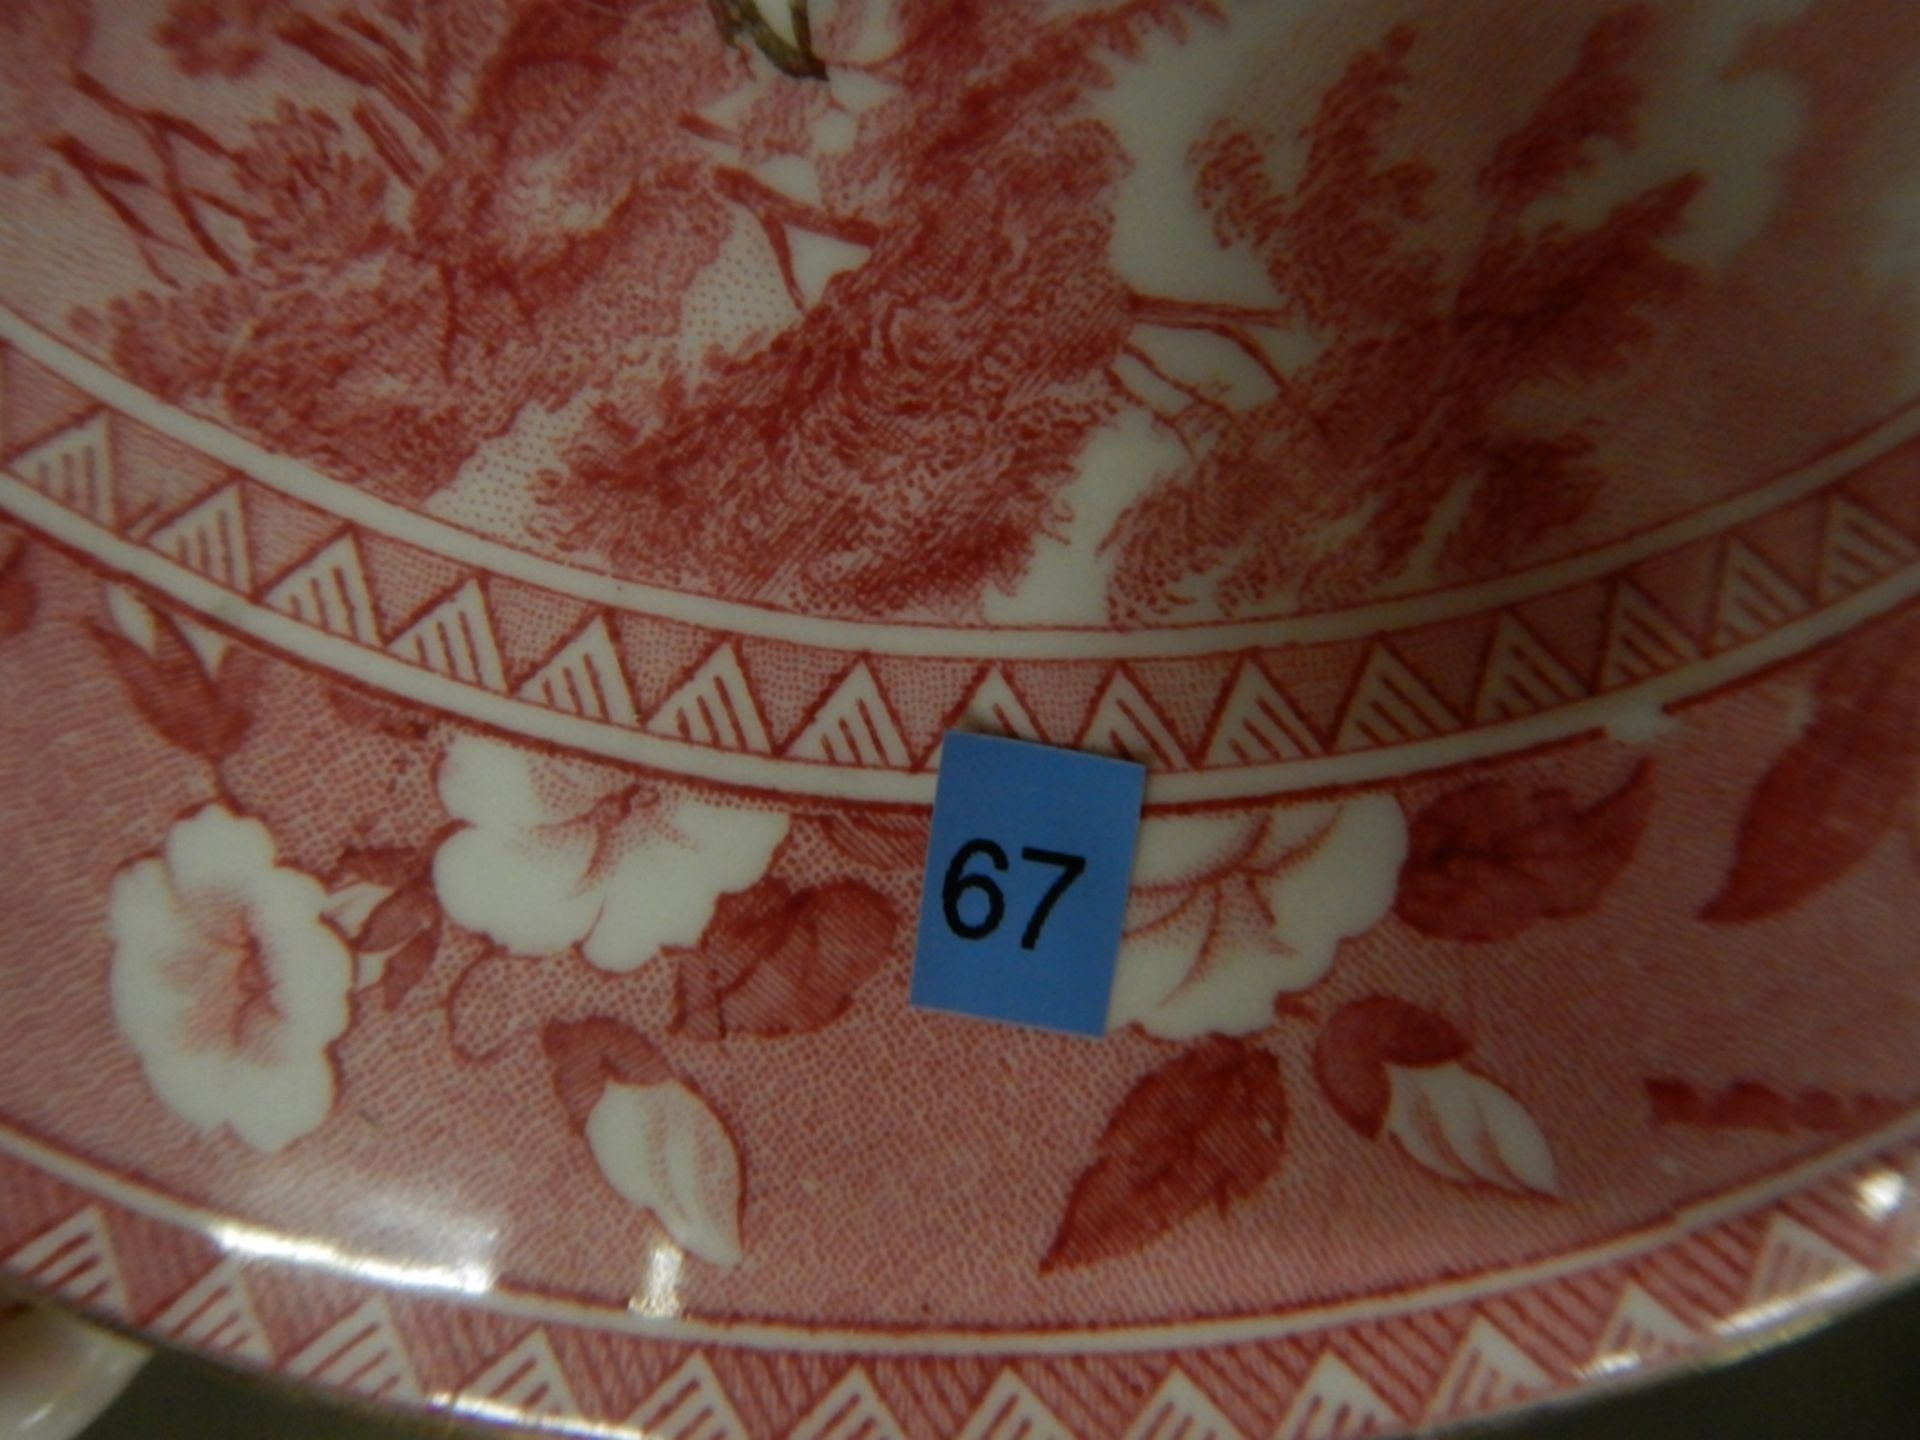 ANTIQUE "RADFORD TOWER" CHINA - COMPLETE DISH & CUP SET - Image 2 of 23